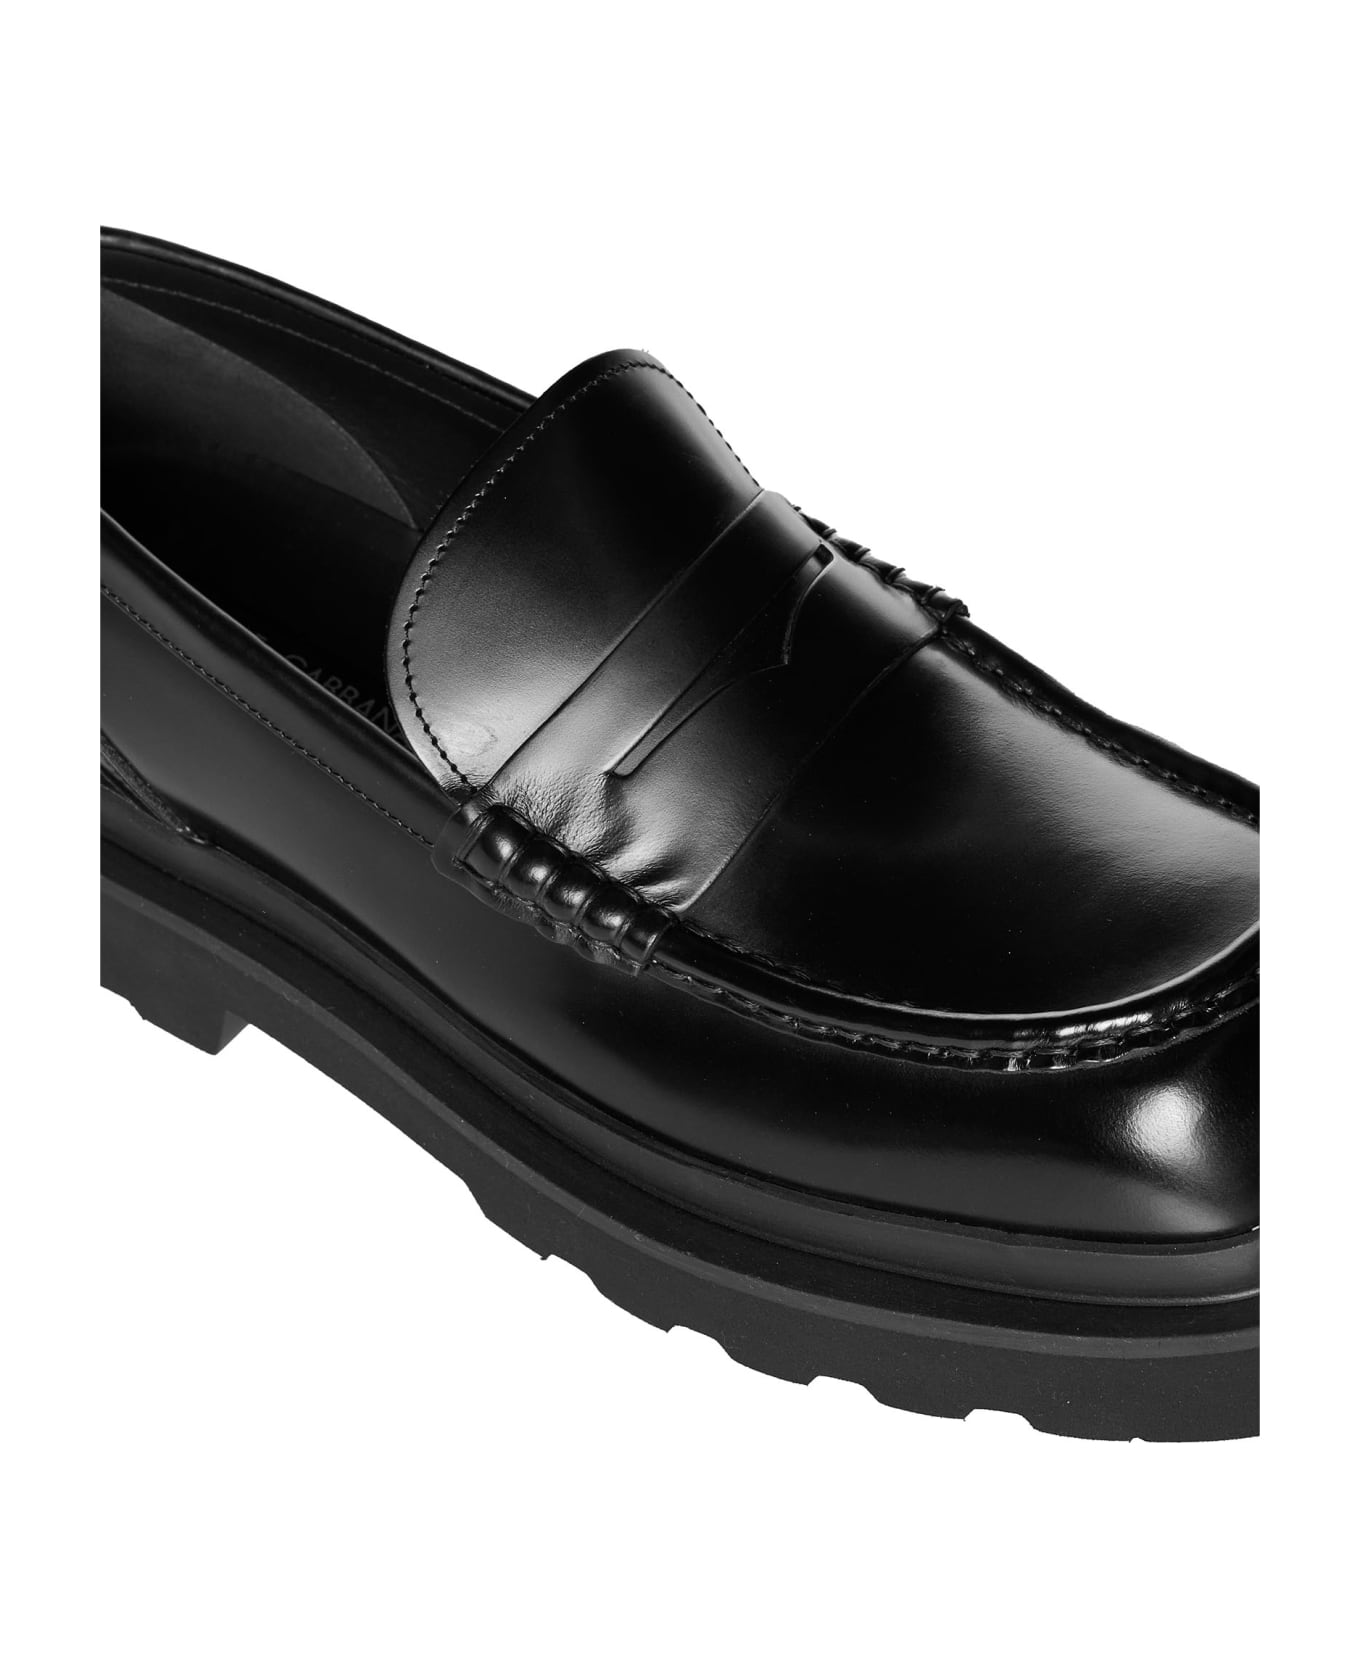 Dolce & Gabbana Leather Loafers - black ローファー＆デッキシューズ